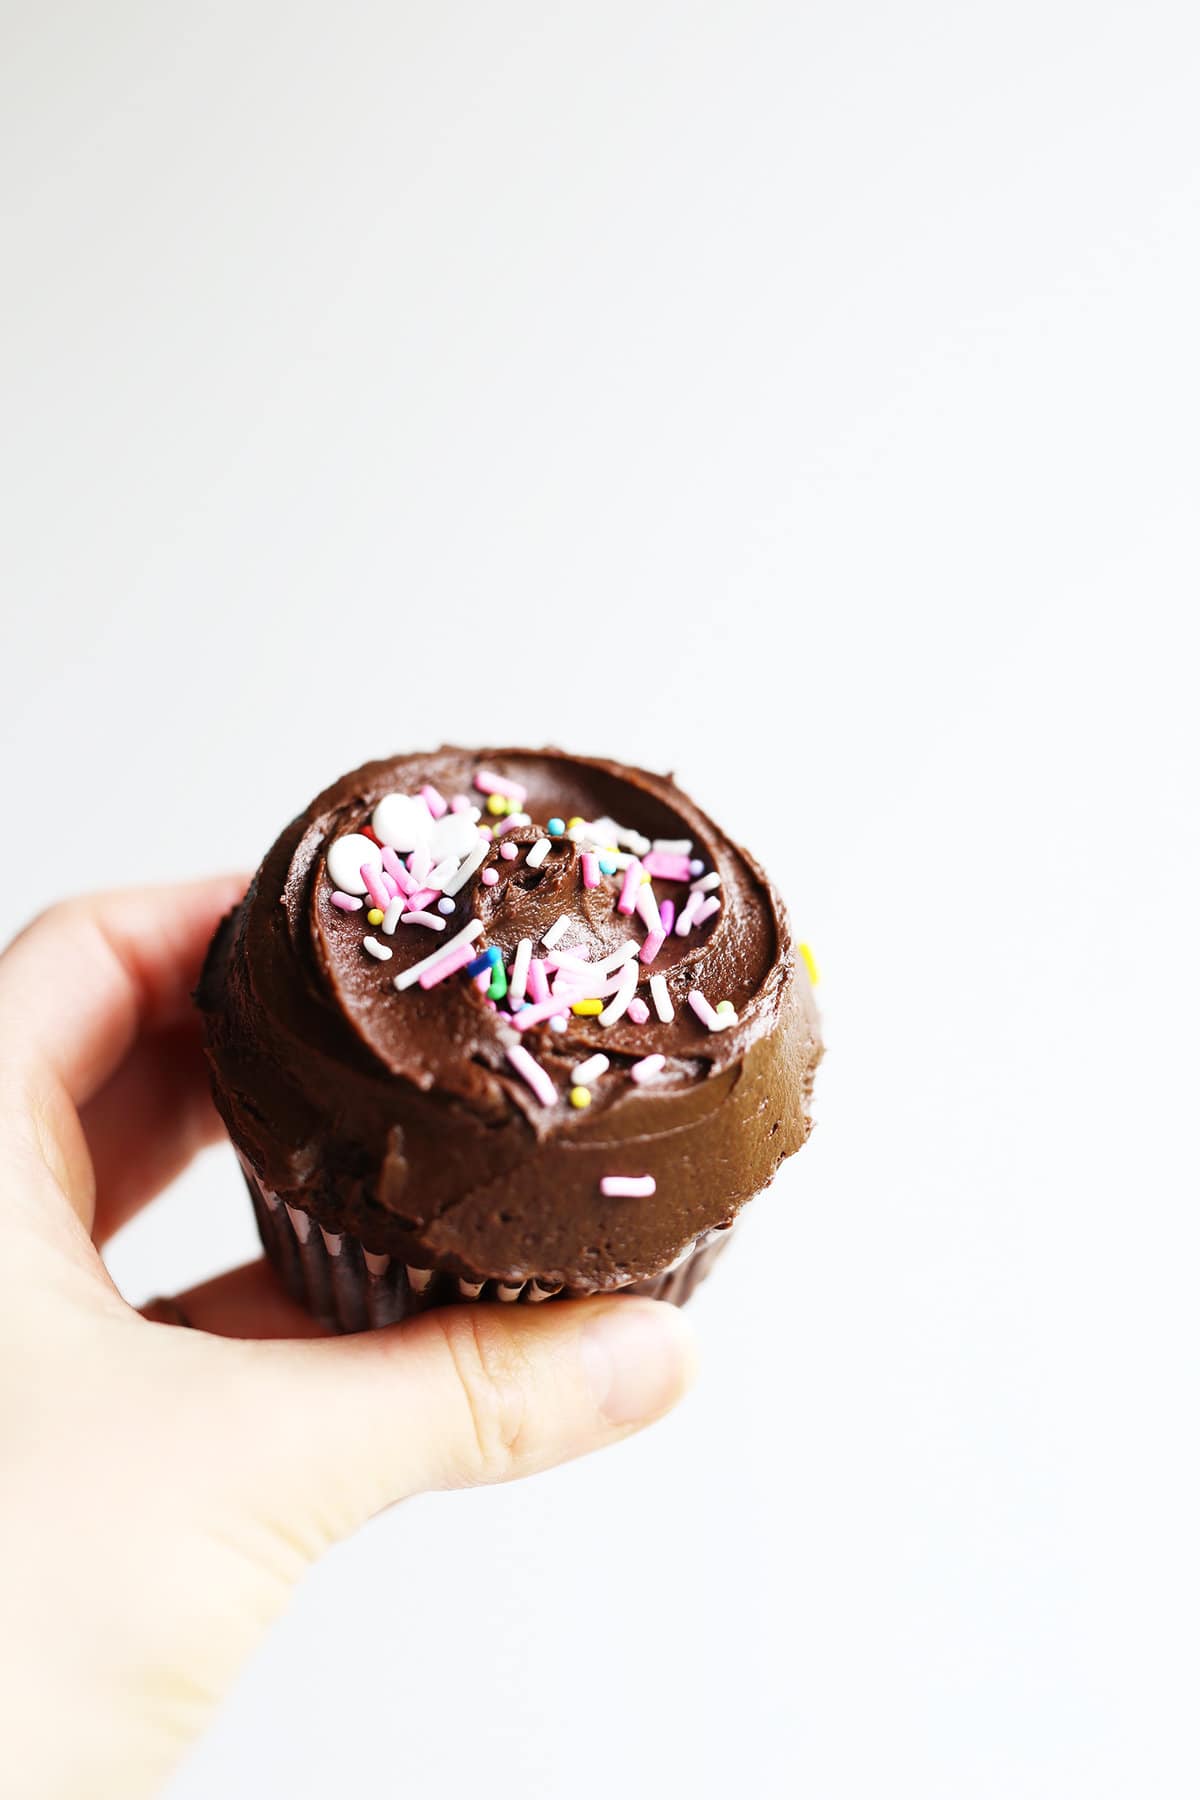 These Chocolate Birthday Cupcakes are the best, soft + moist, indulgent cupcakes ever! Vegan and sweet, easy to make and topped with fun sprinkles.